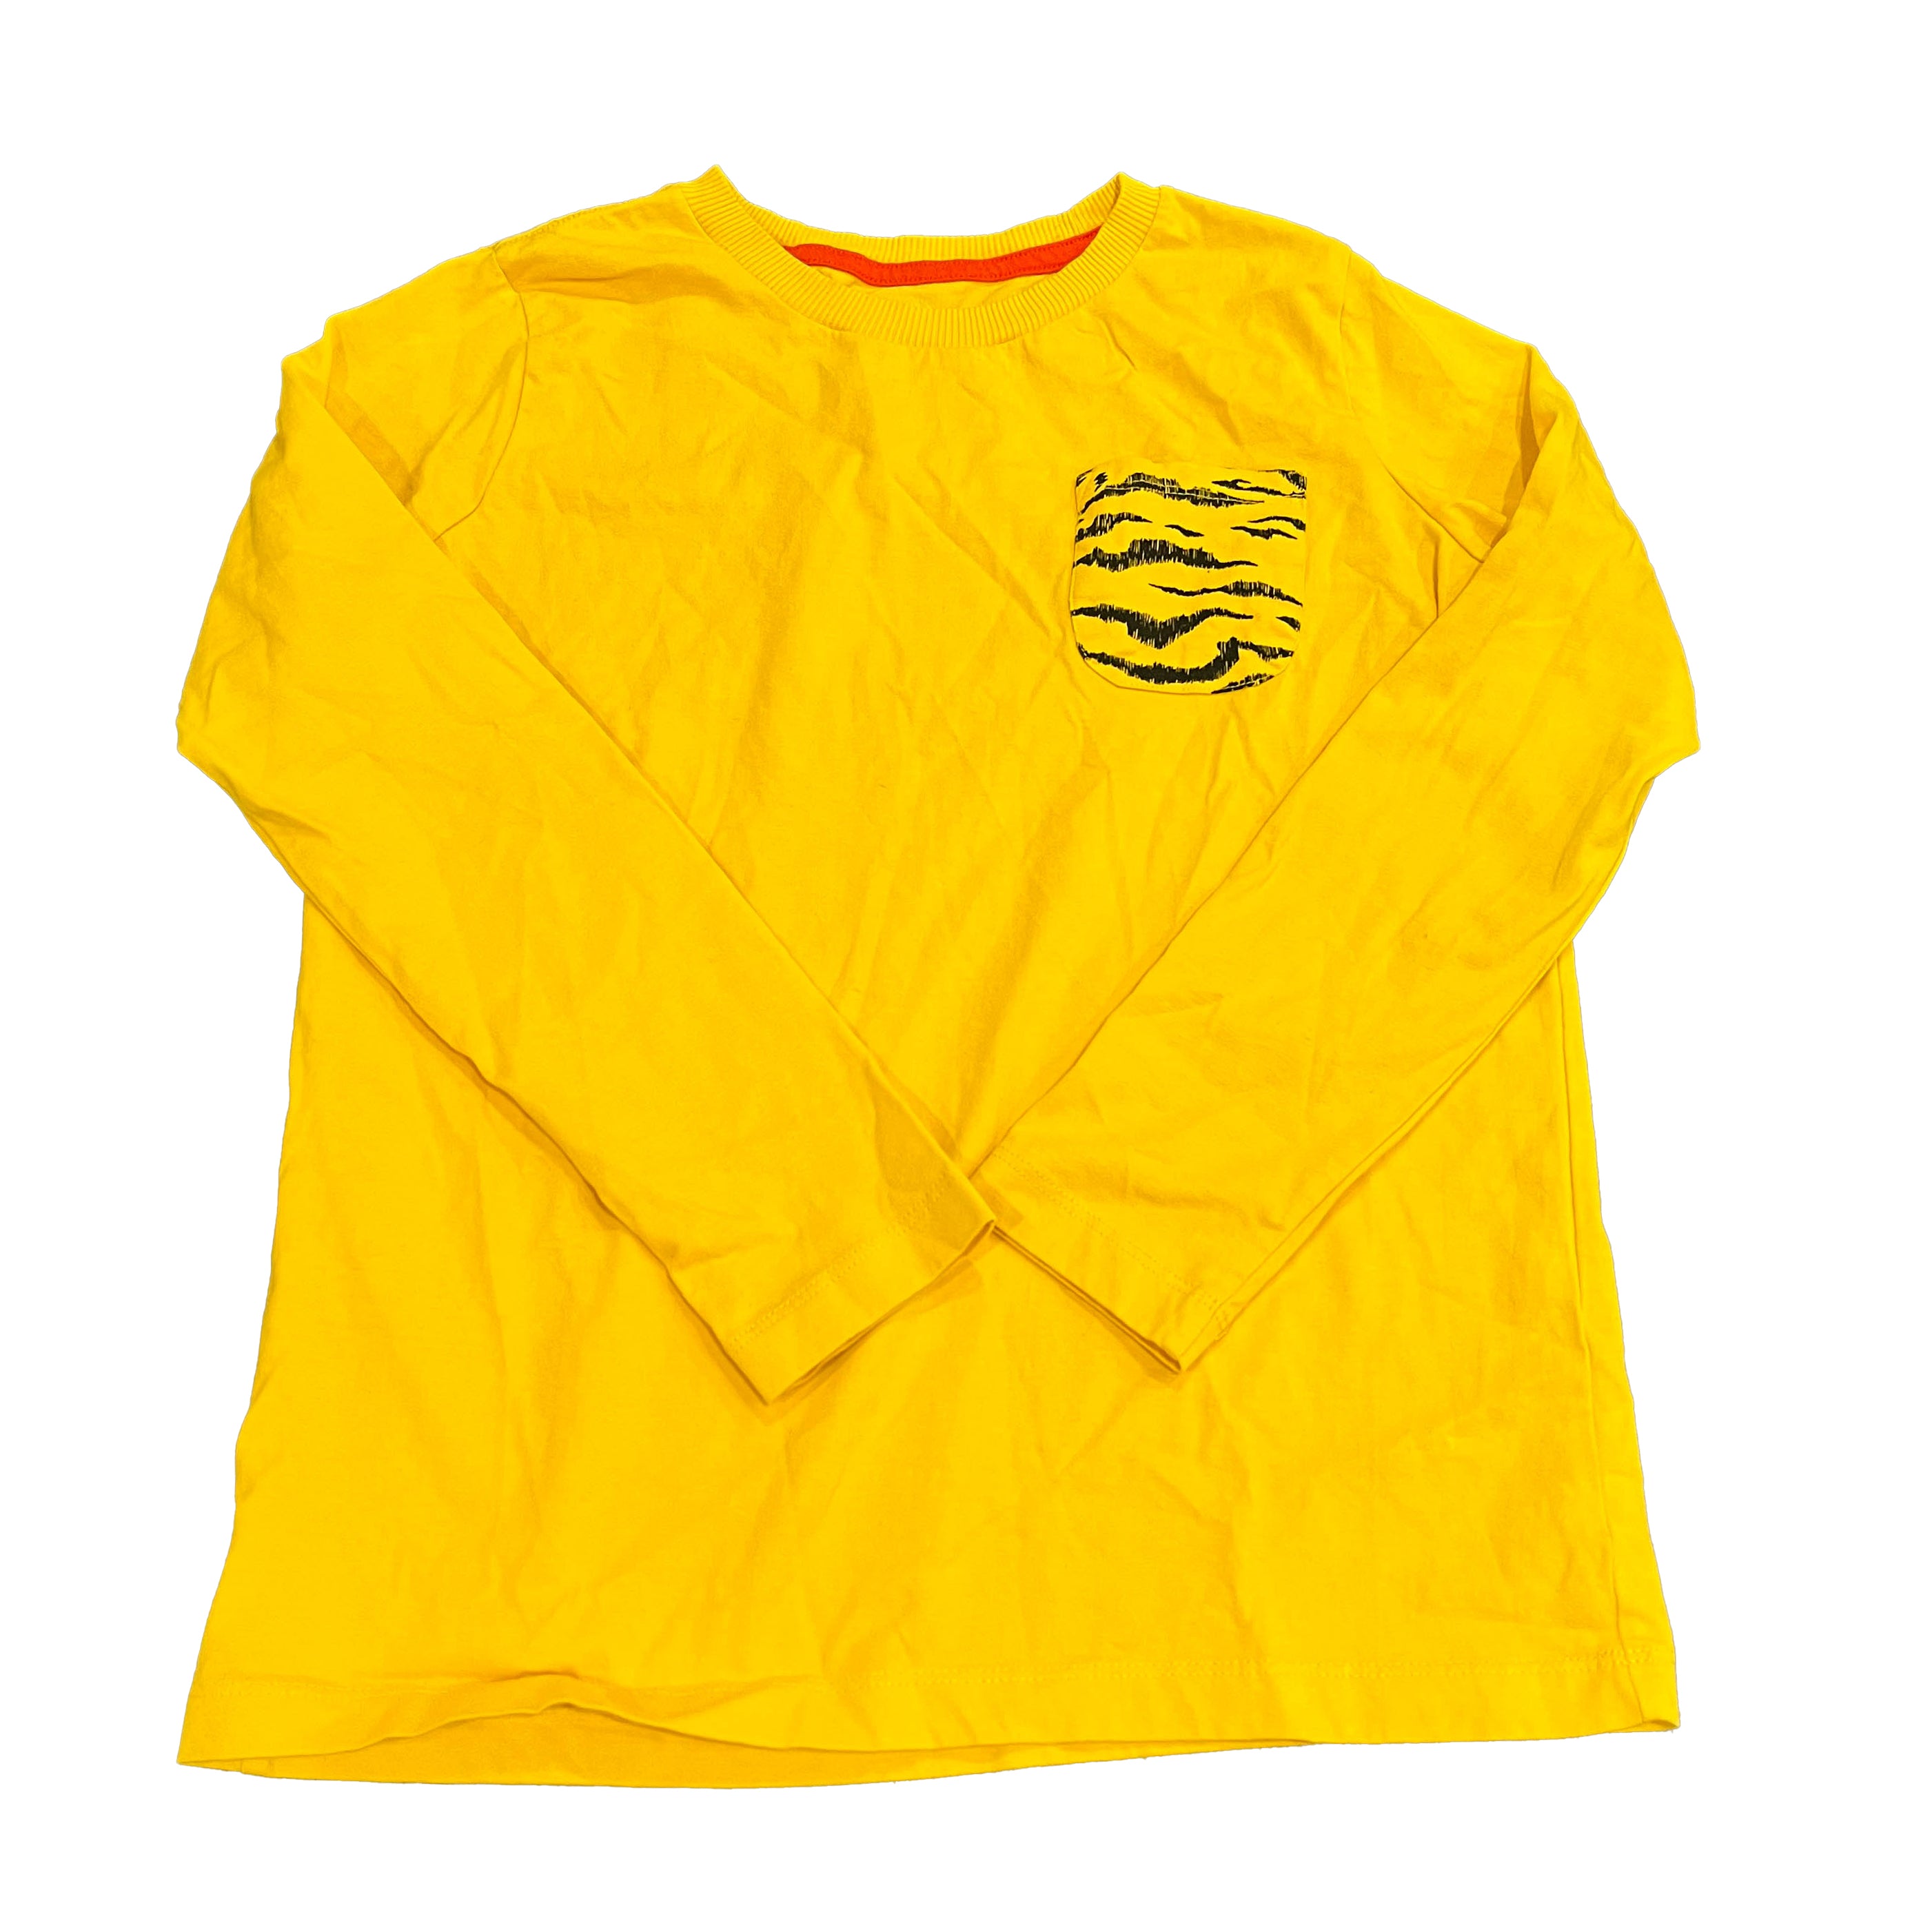 Pre-owned Yellow T-Shirt size: 6-14 Years